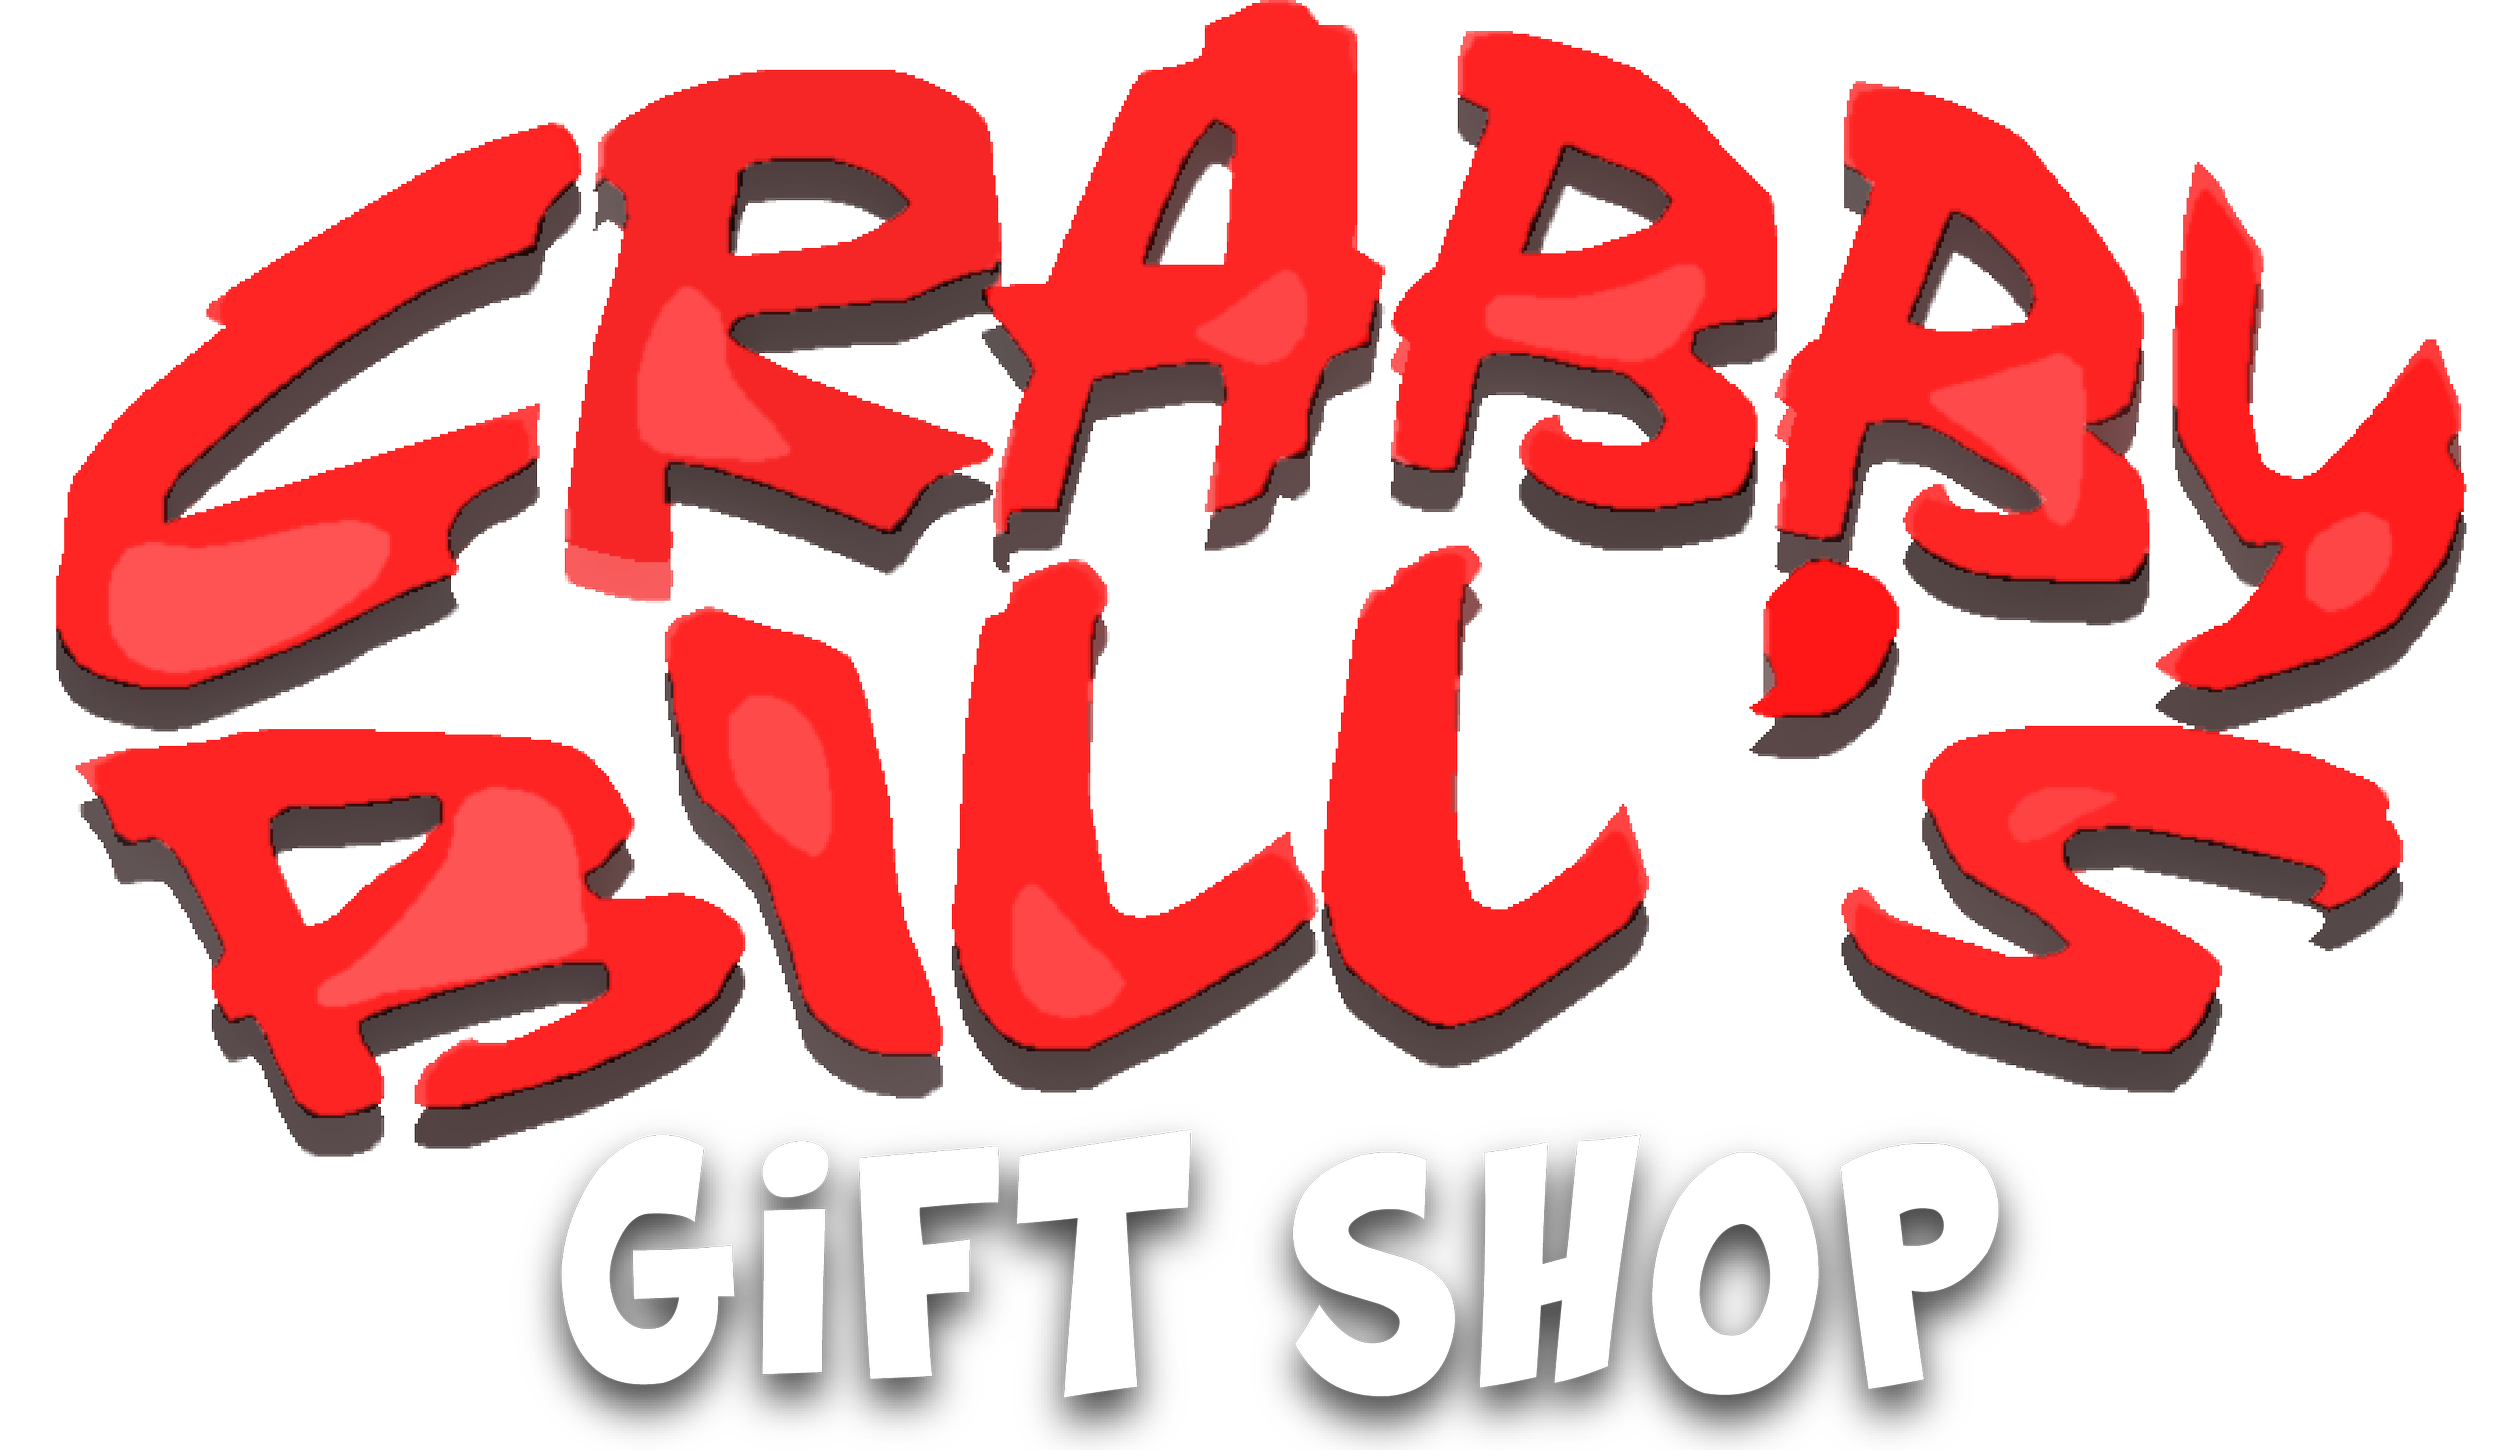 Crabby’s Gifts